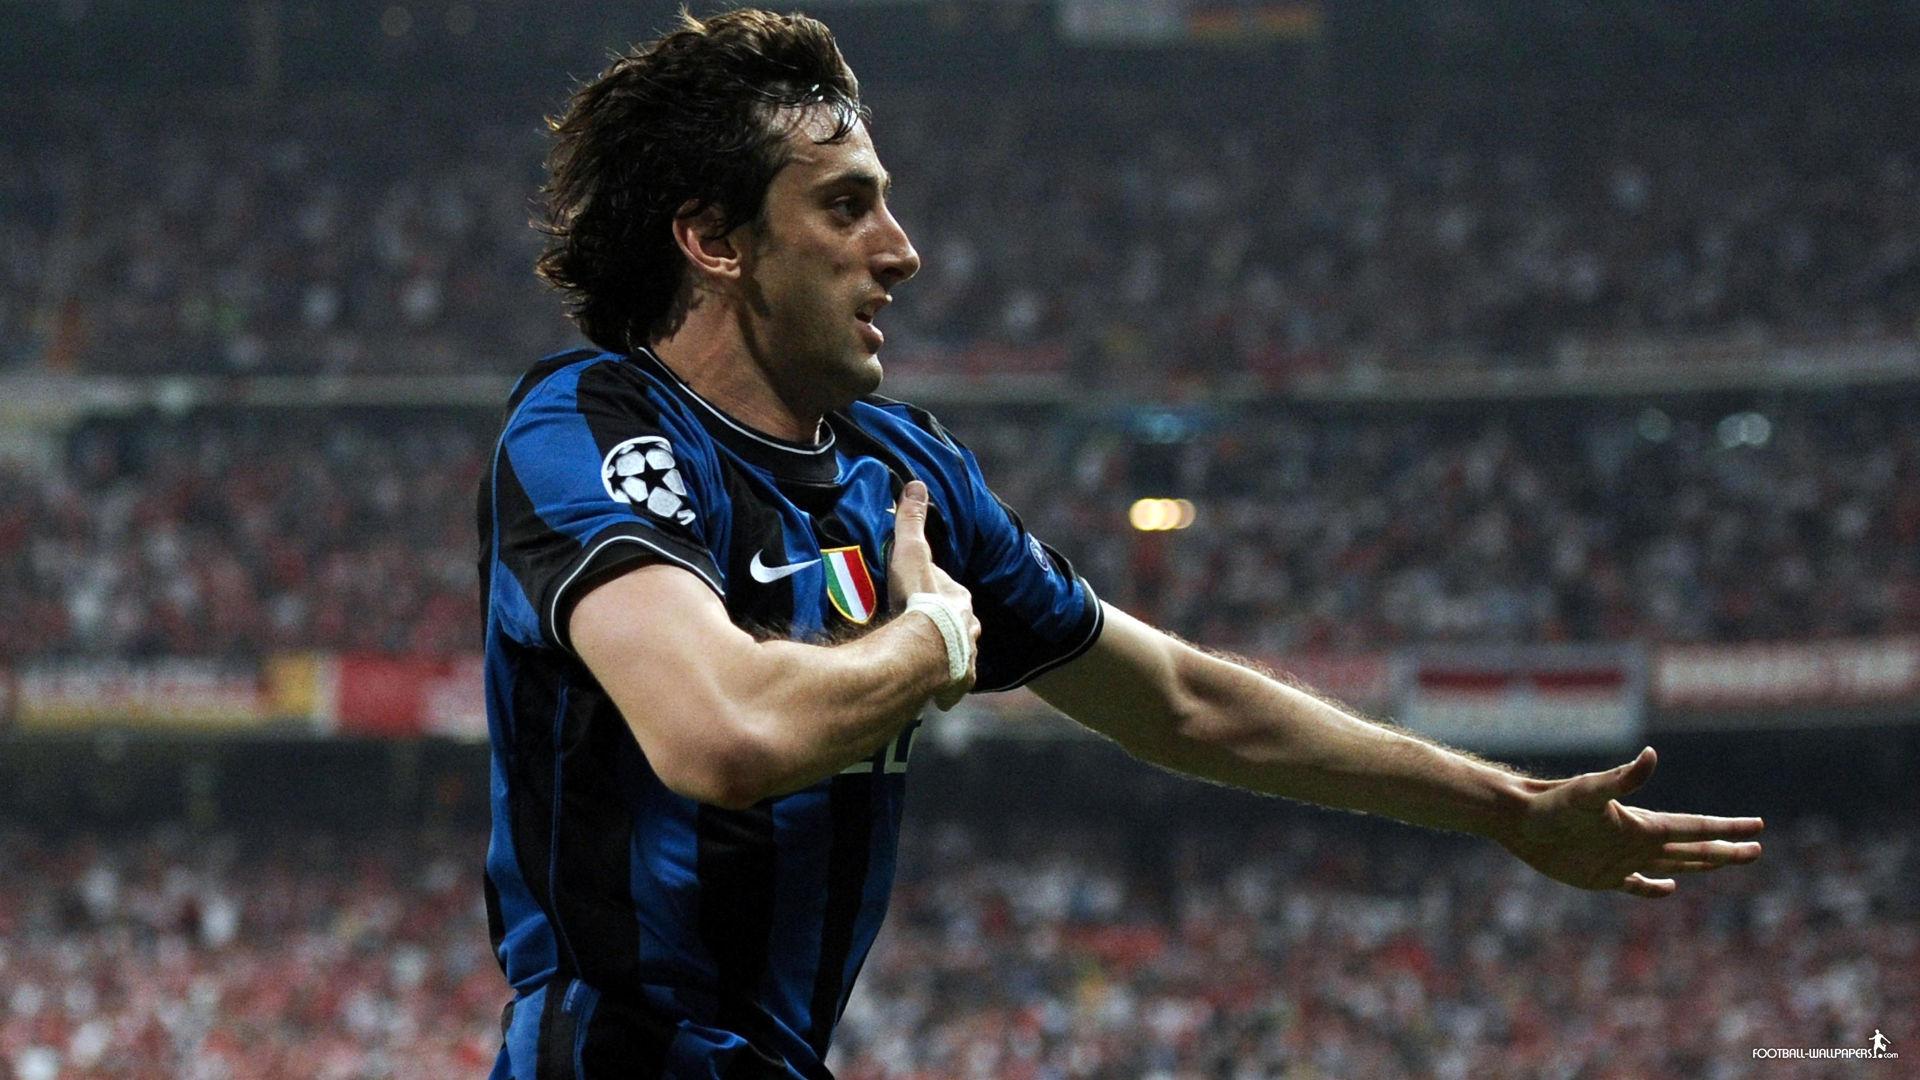 Diego Milito Inter Wallpaper: Players, Teams, Leagues Wallpaper